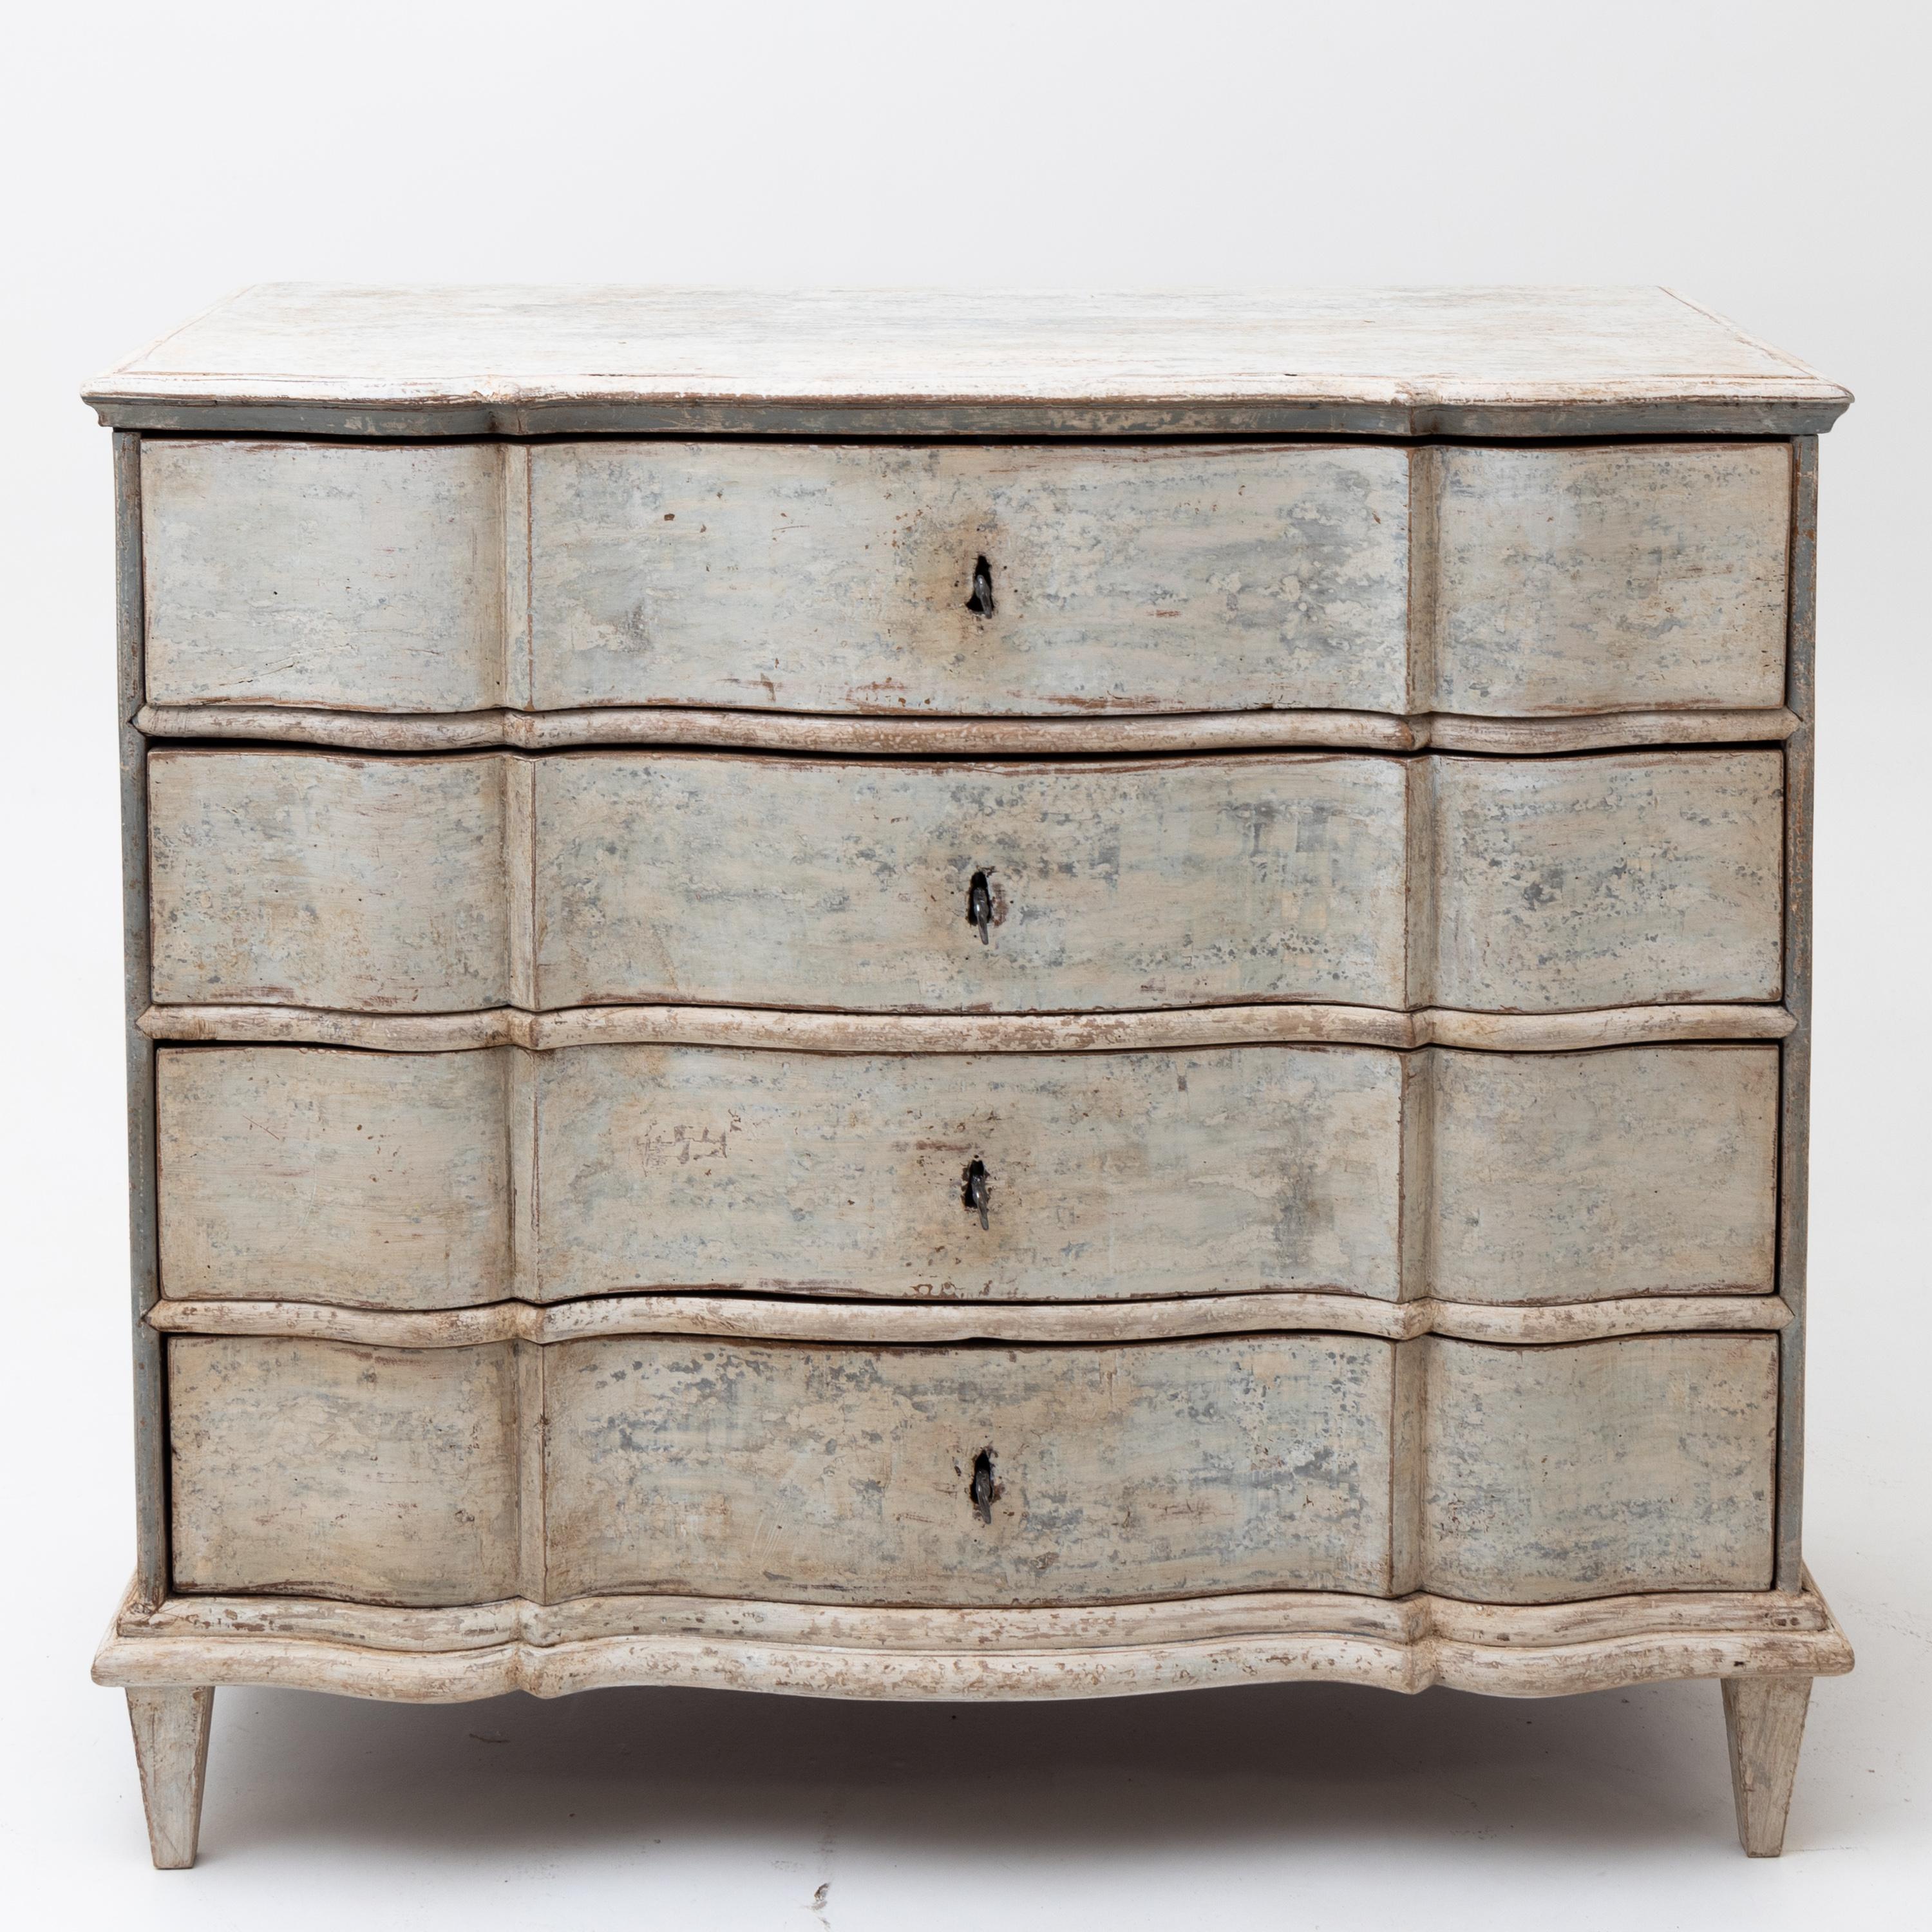 French Provincial Painted Provincial Baroque Chest of Drawers, 18th Century